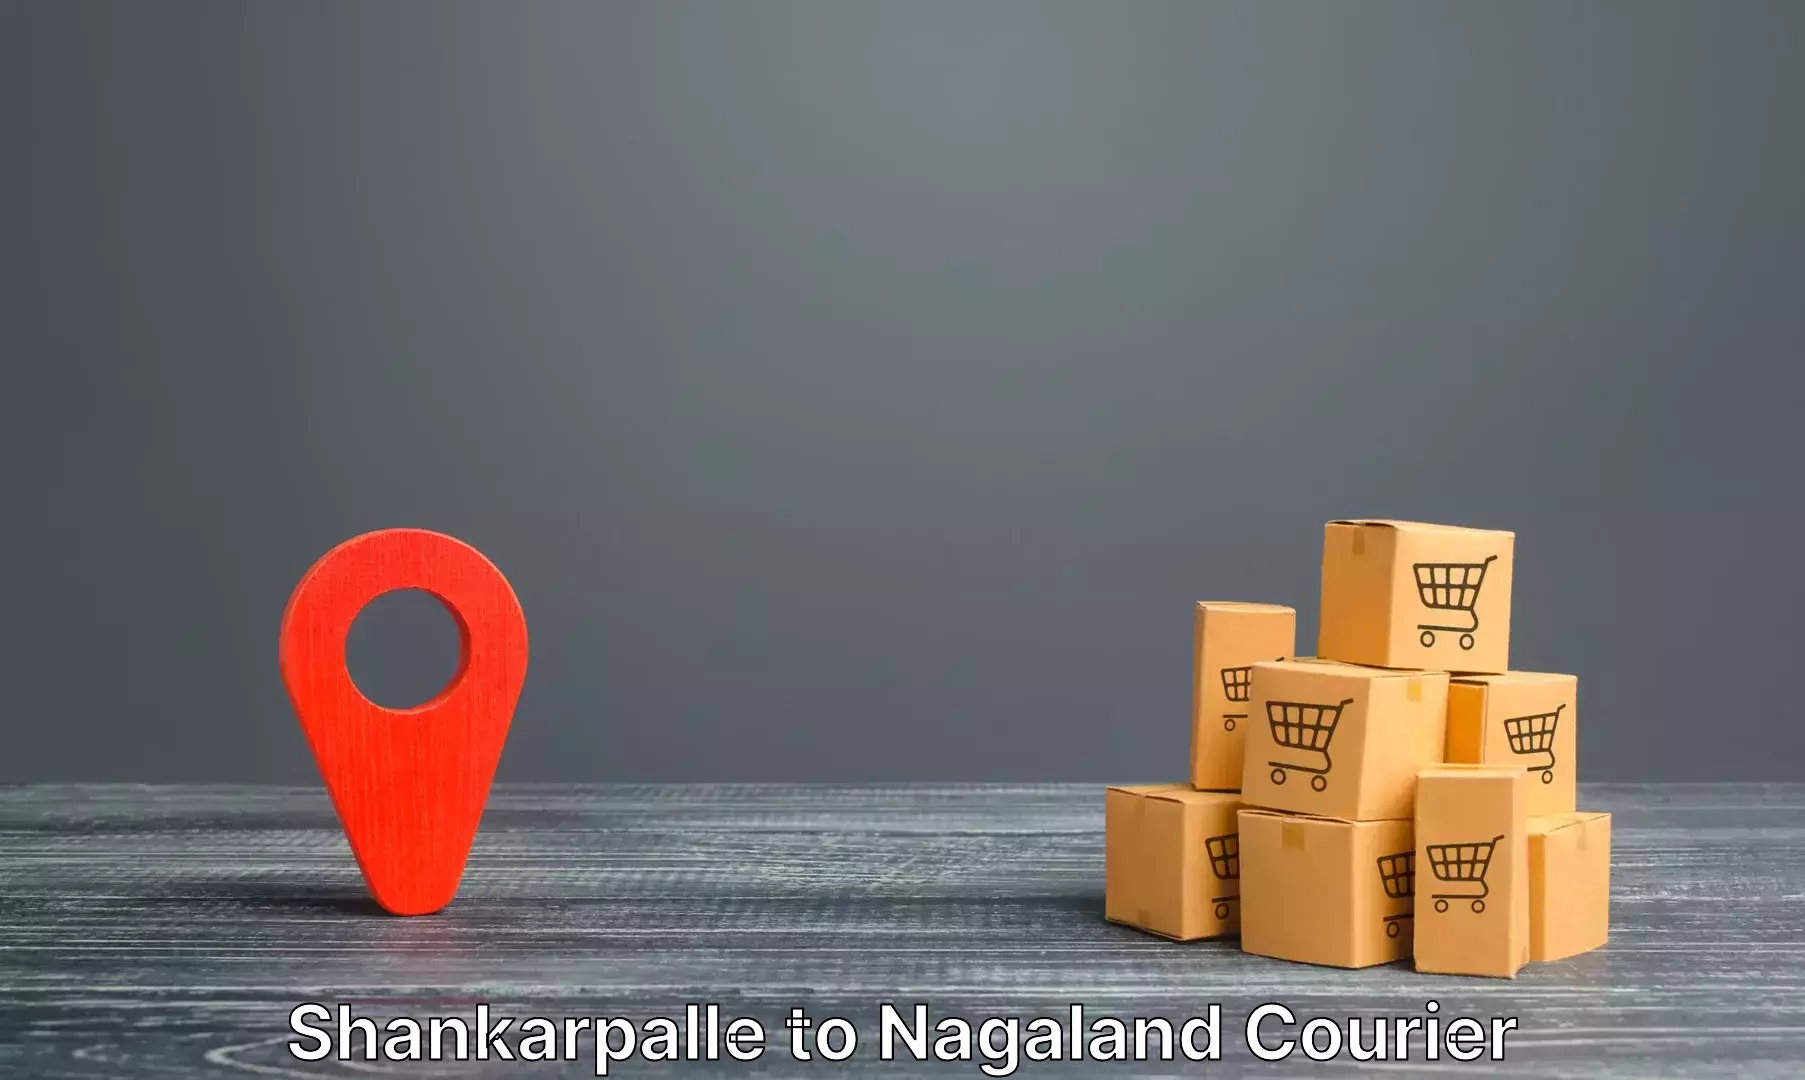 Luggage delivery network Shankarpalle to Nagaland